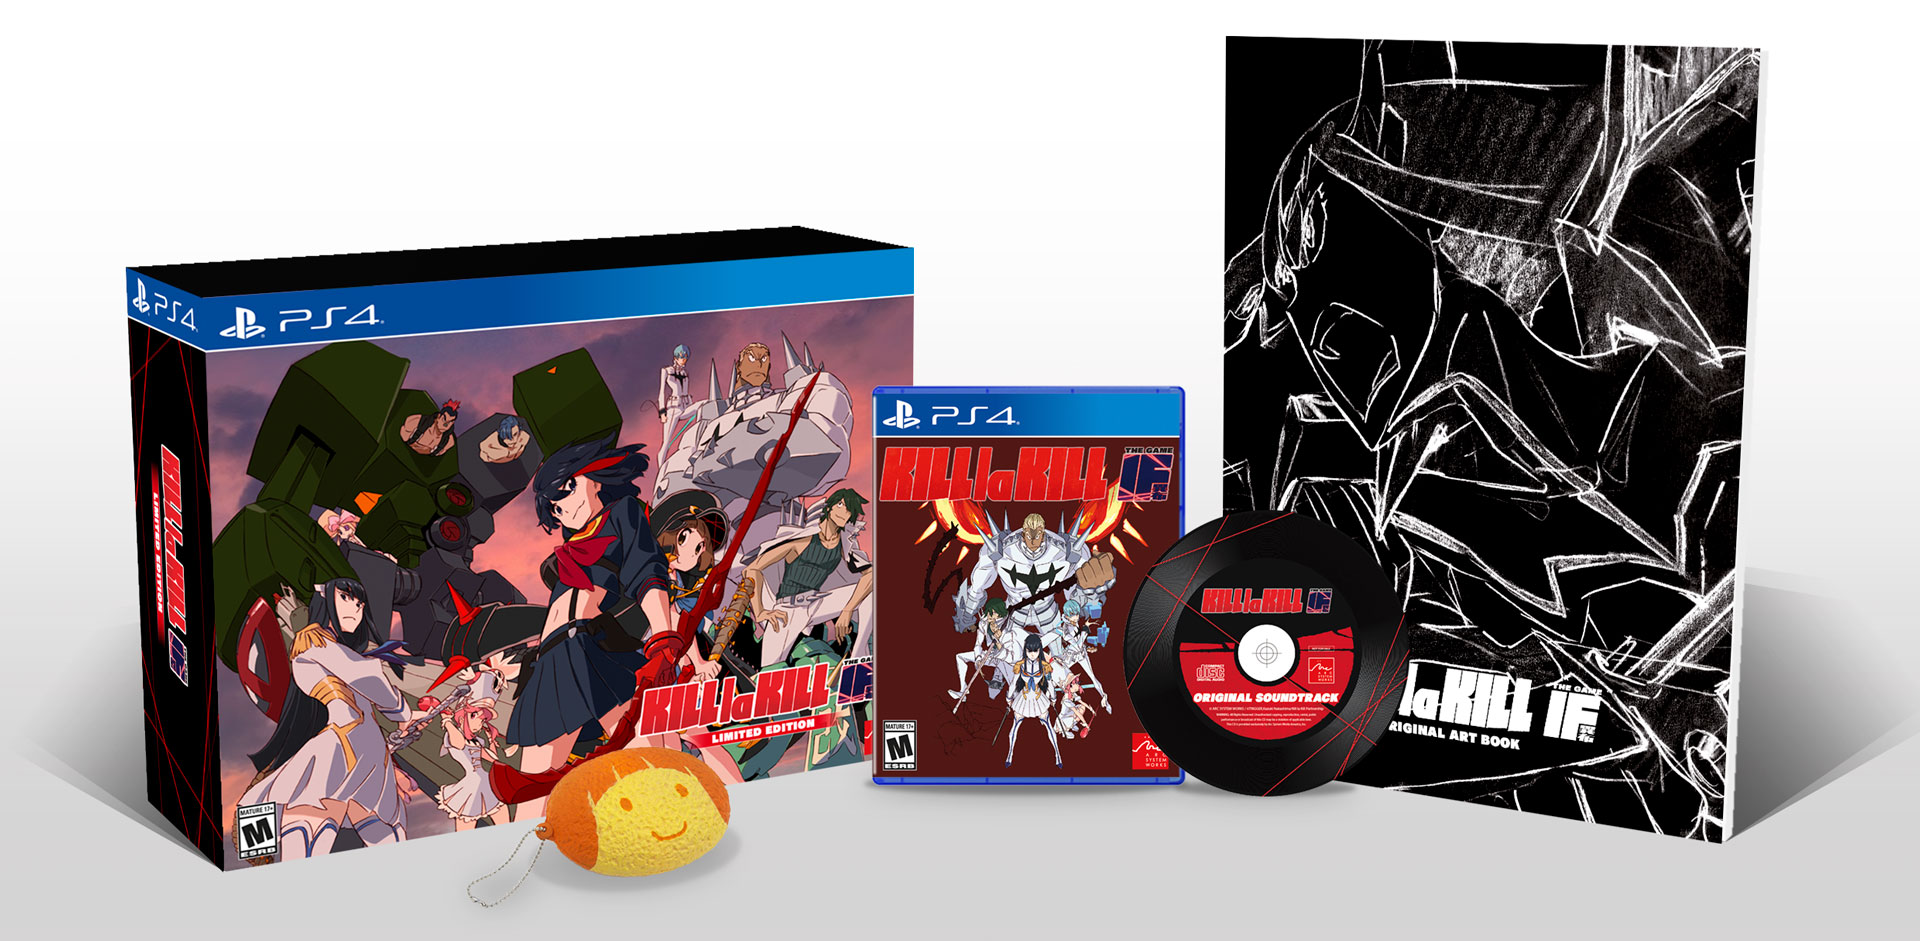 KILL la KILL – IF Limited Edition Now Available for Pre-Order